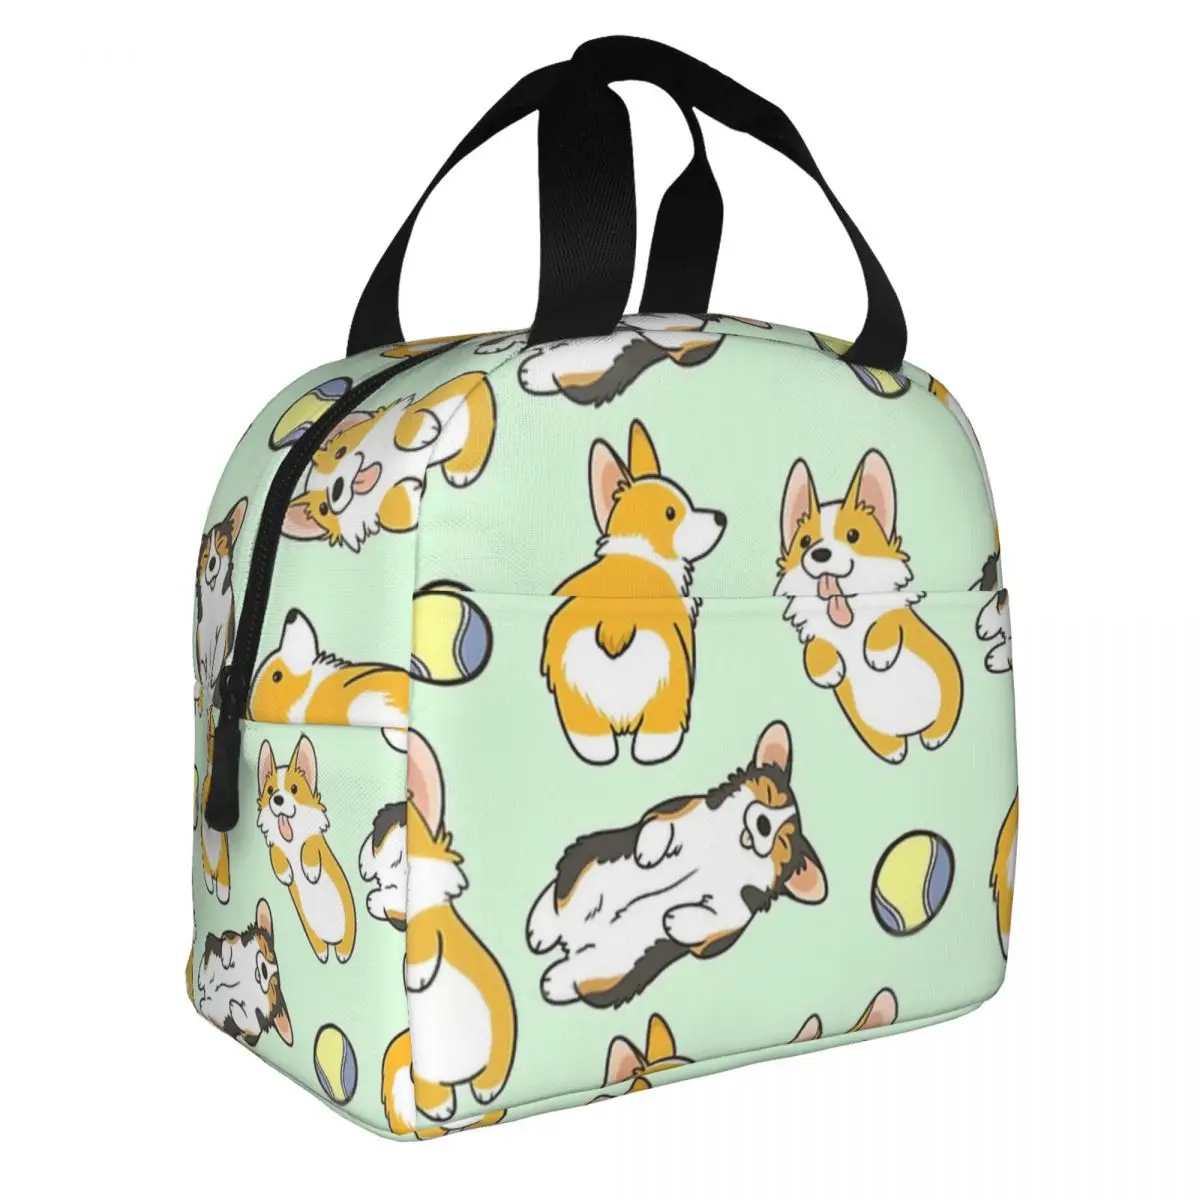 Corgi Set Lunch Bento Bags Portable Aluminum Foil thickened Thermal Cloth Lunch Bag for Women Men Boy